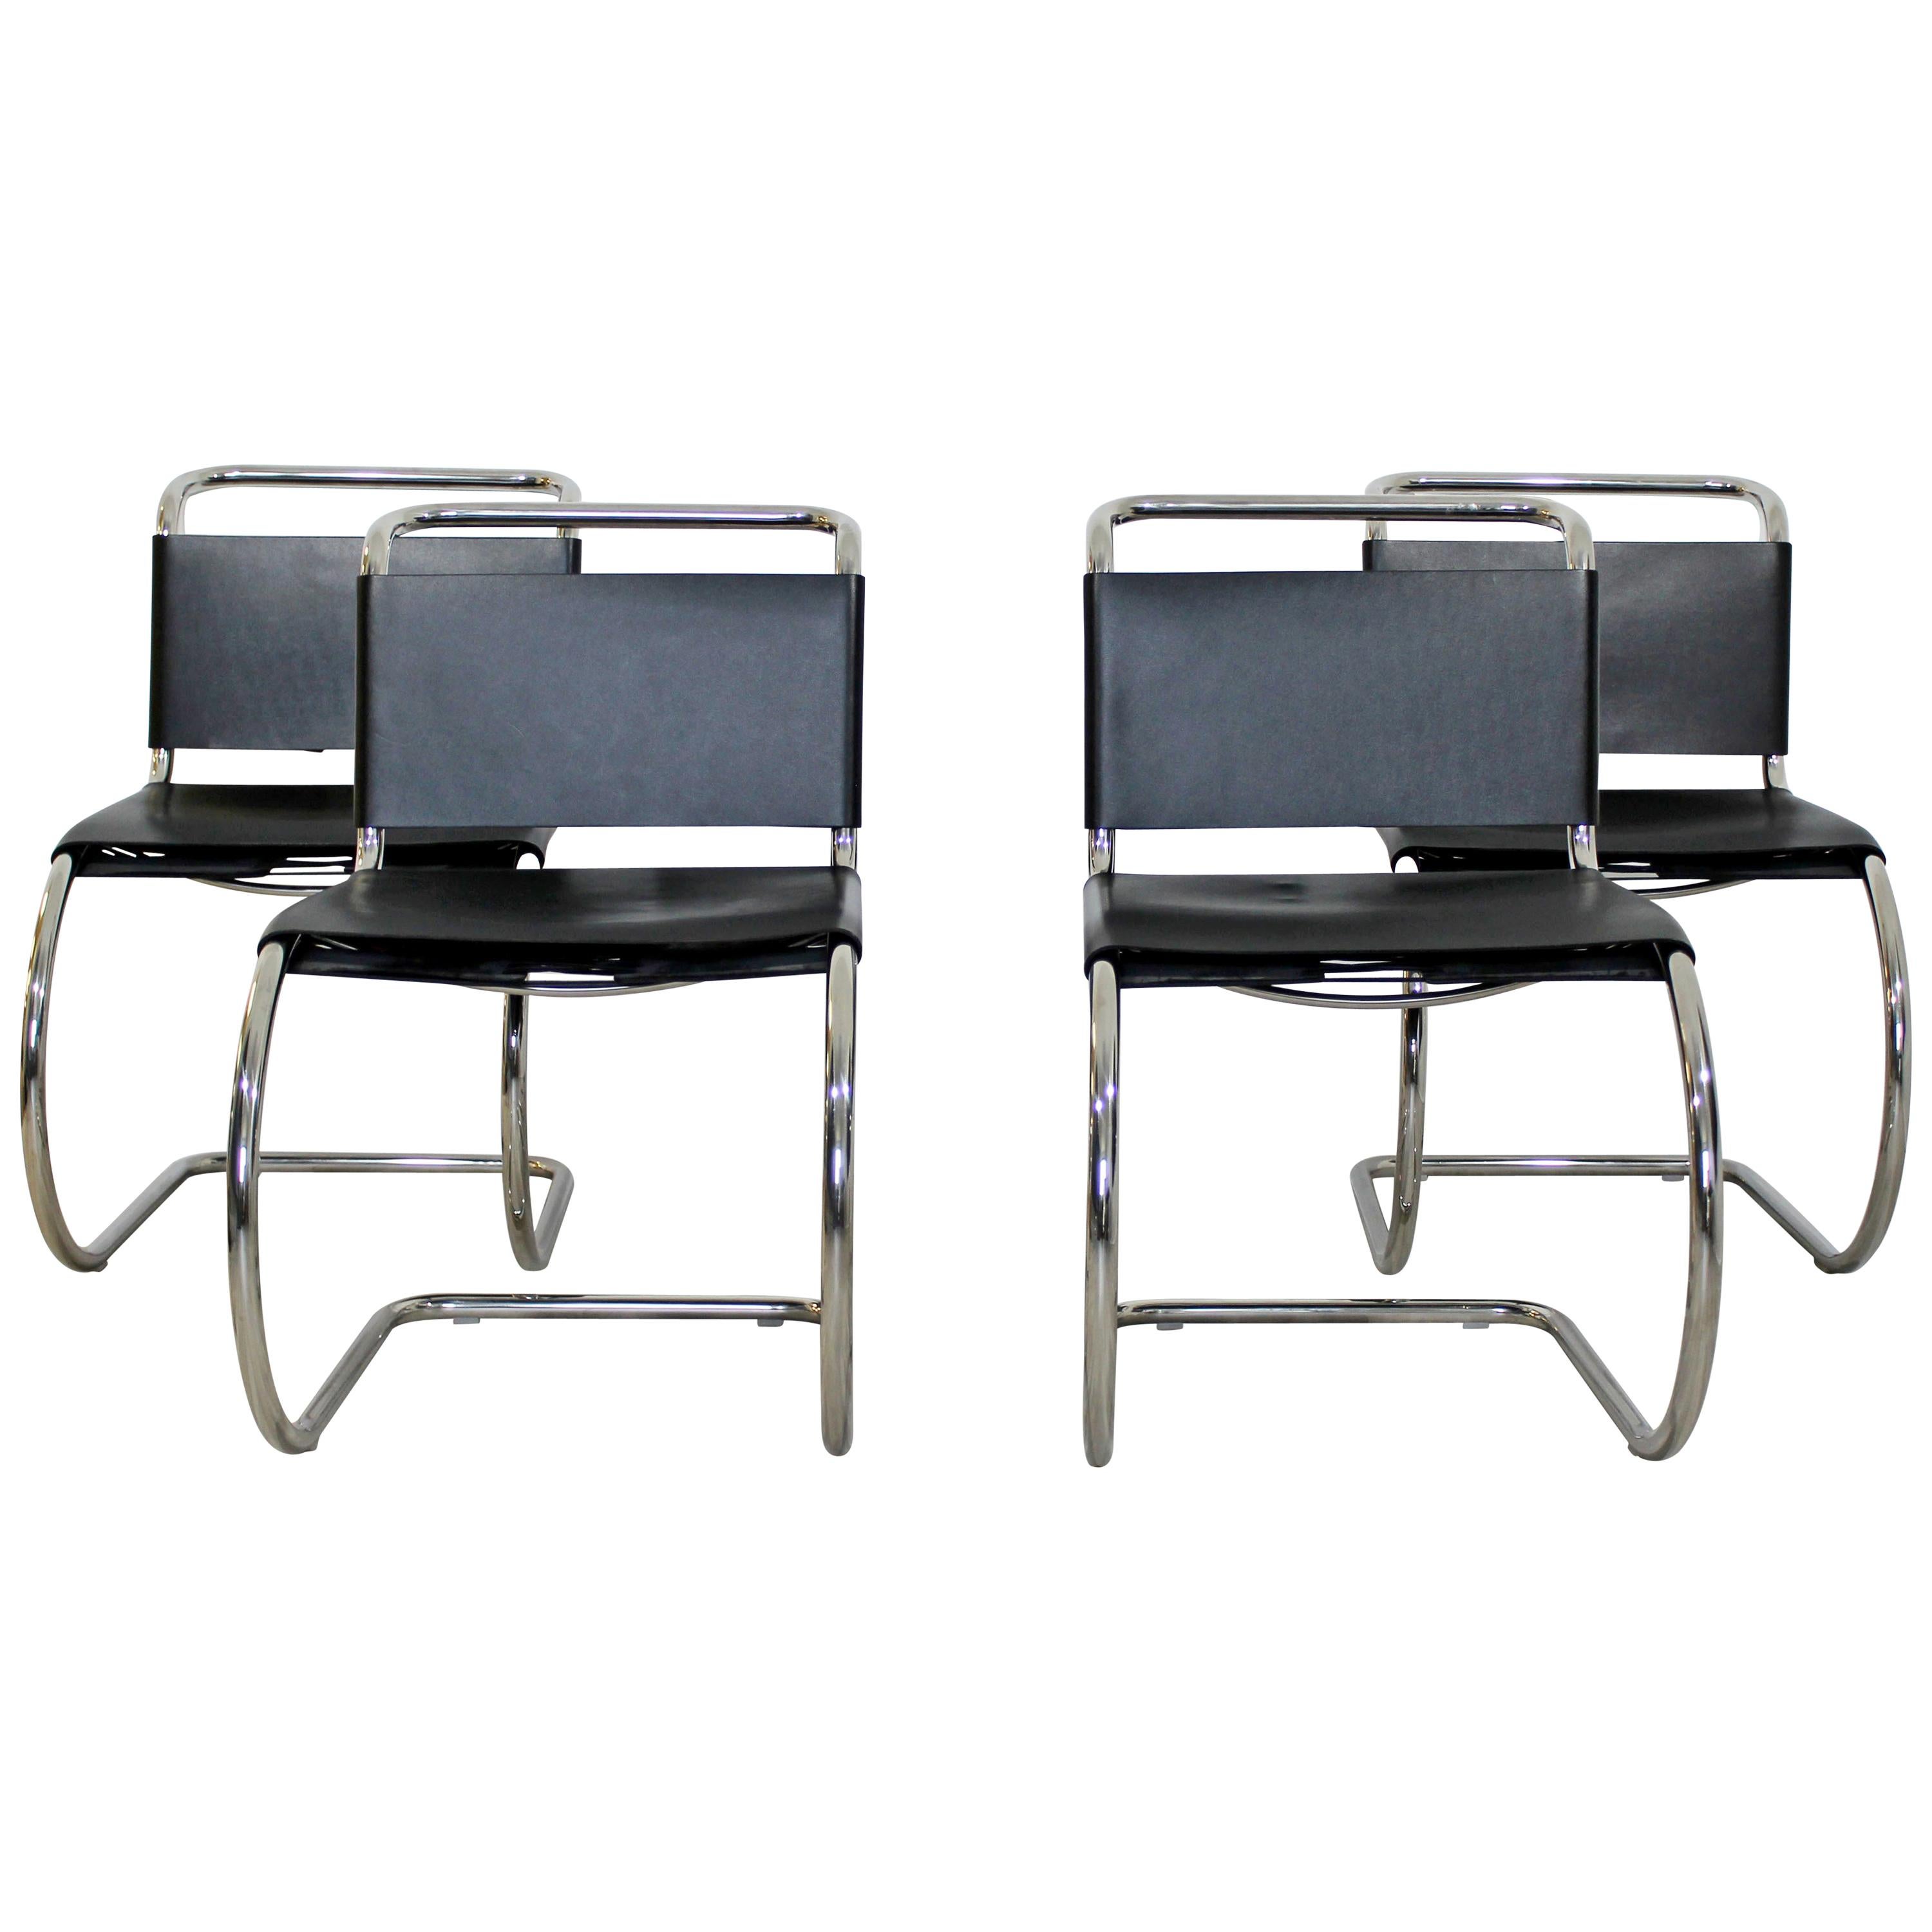 Mid-Century Modern MR Mies van der Rohe Knoll Cantilever Chrome Chairs, 1970s